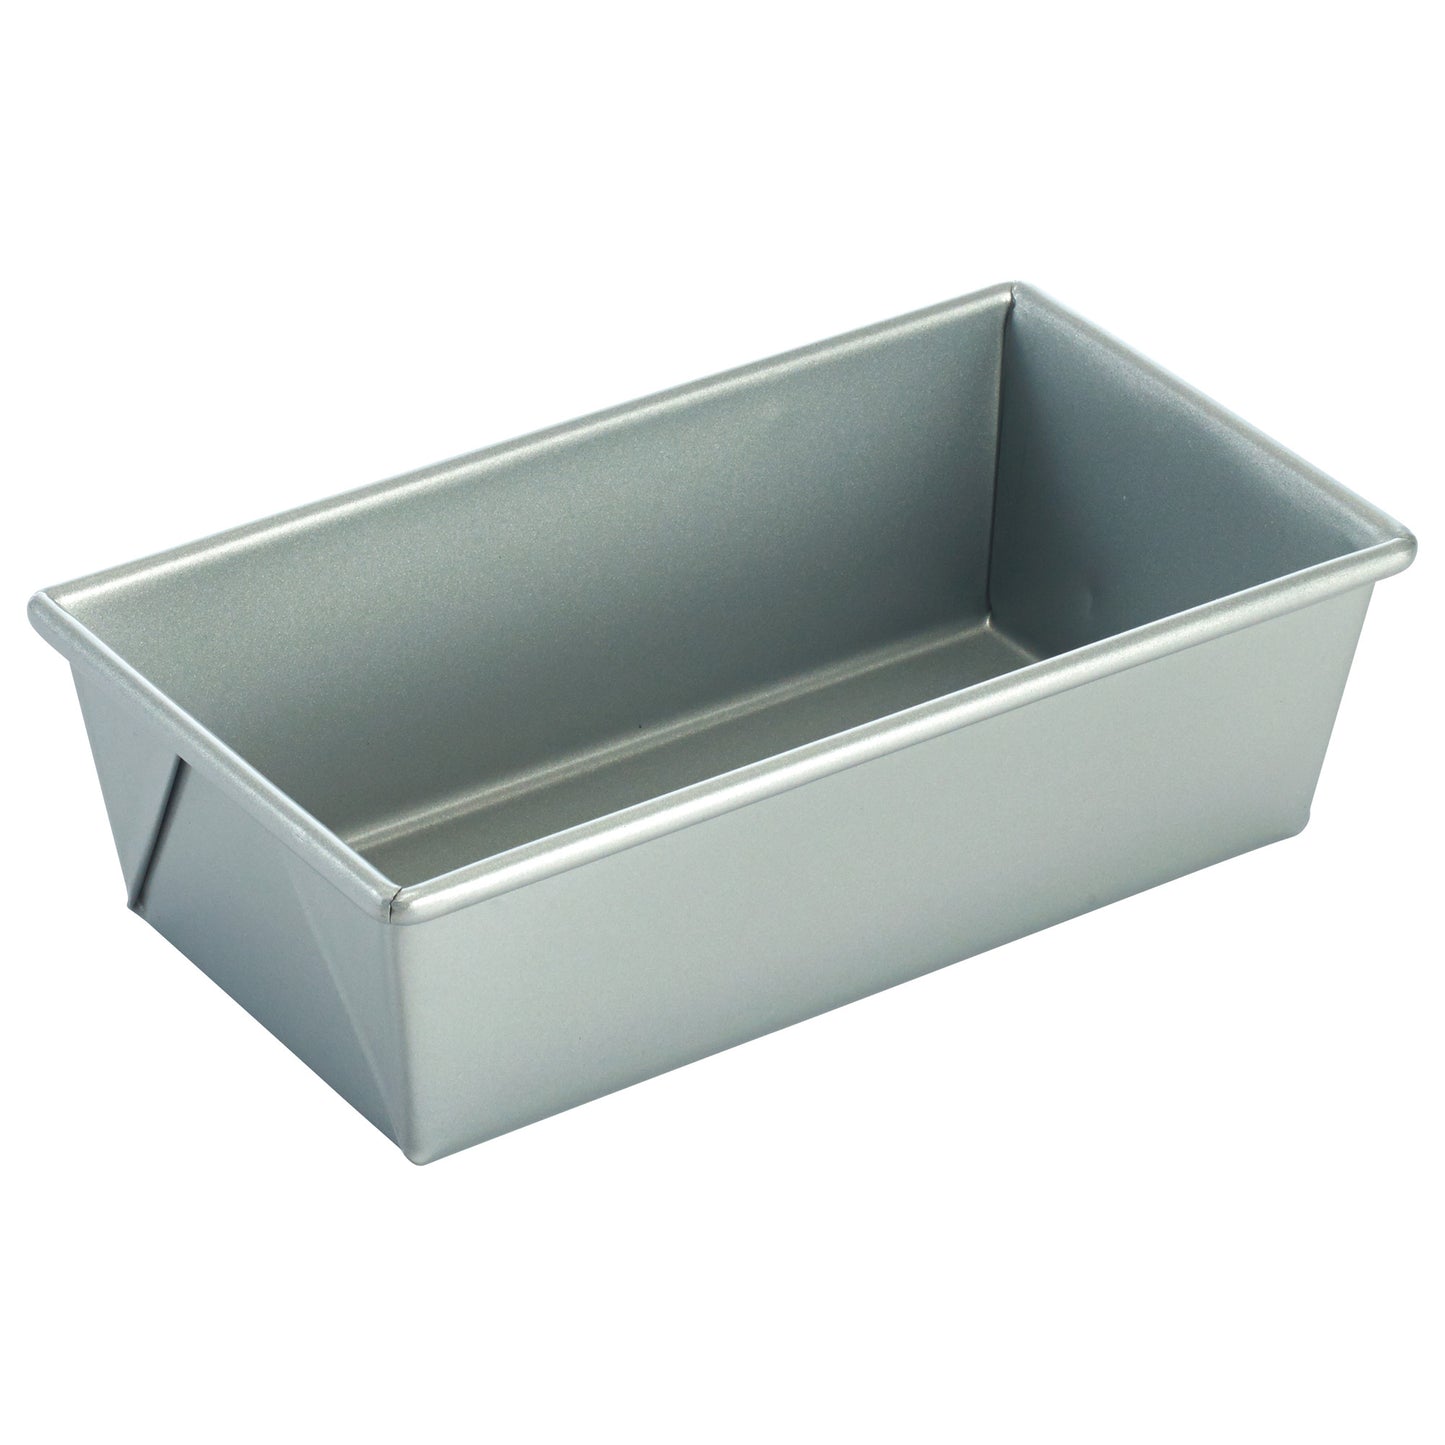 HLP-84 - Aluminized Steel Loaf Pans with Silicone Glaze - 1 lb, 8-1/2" x 4-1/2" x 2-3/4"